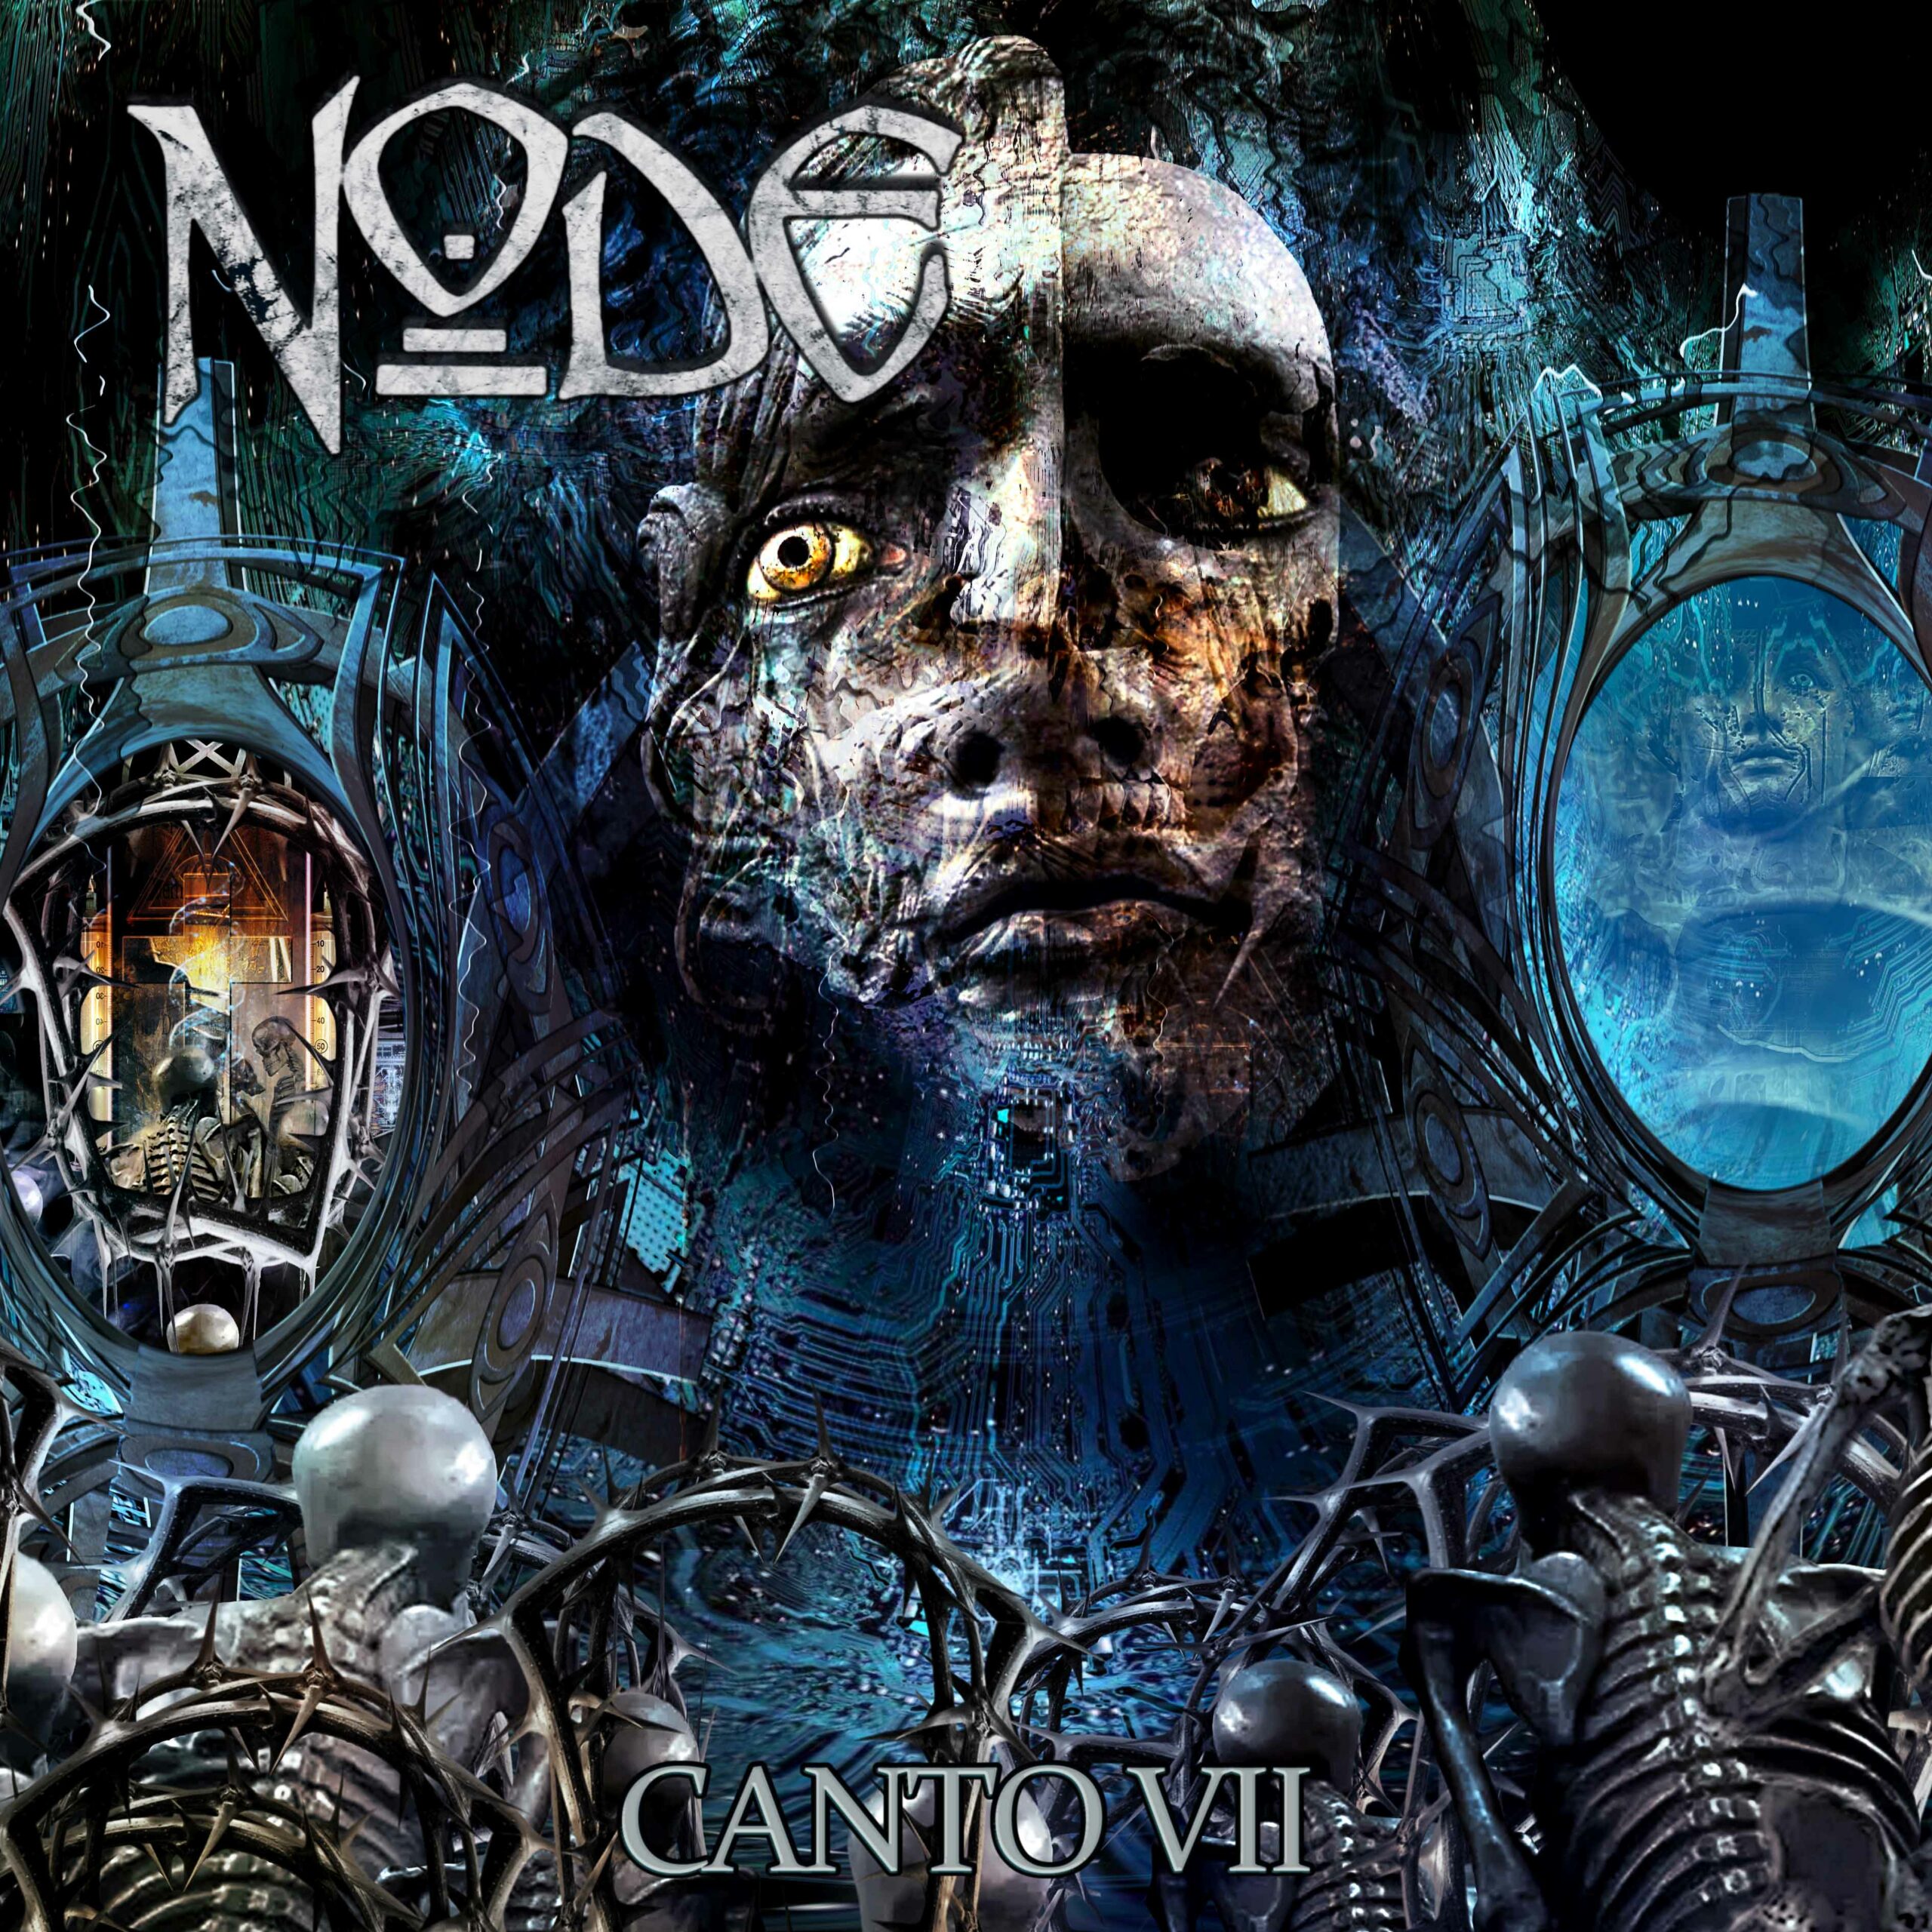 NODE : IL VIDEO DI “THE SACRED THEATER OF NOTHINGNESS”